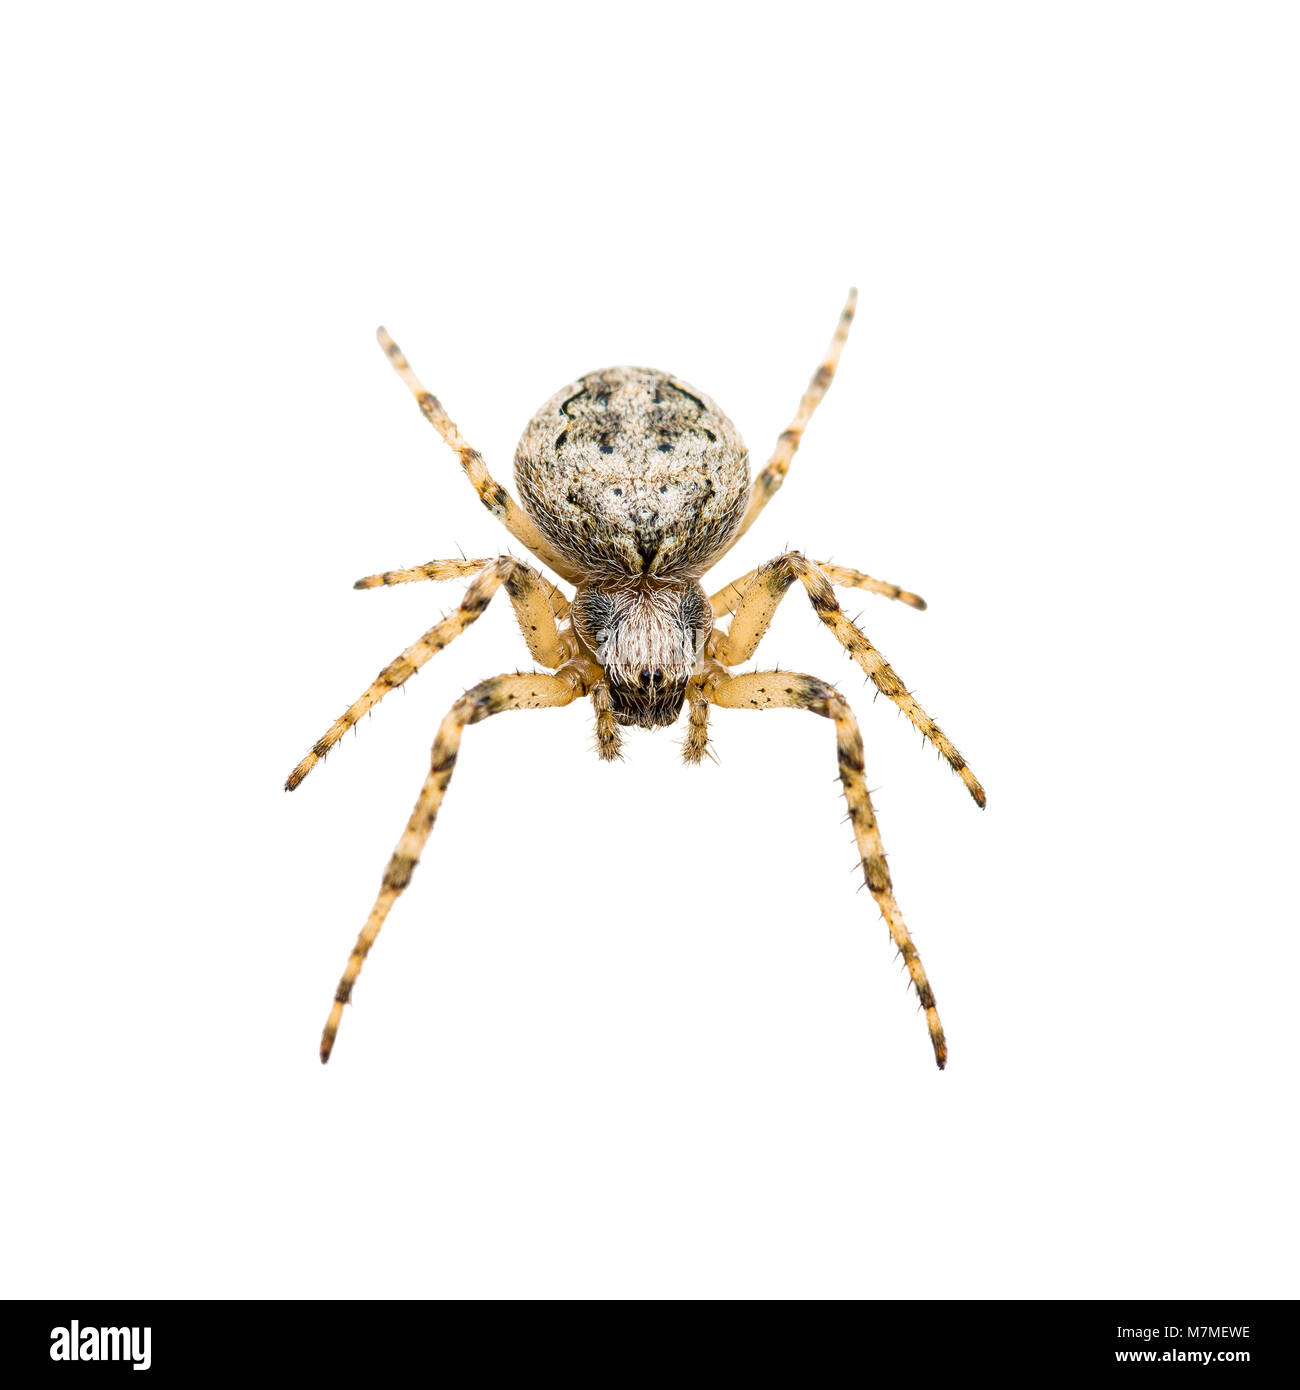 Crawling Spider Arachnid Insect Isolated on White Stock Photo